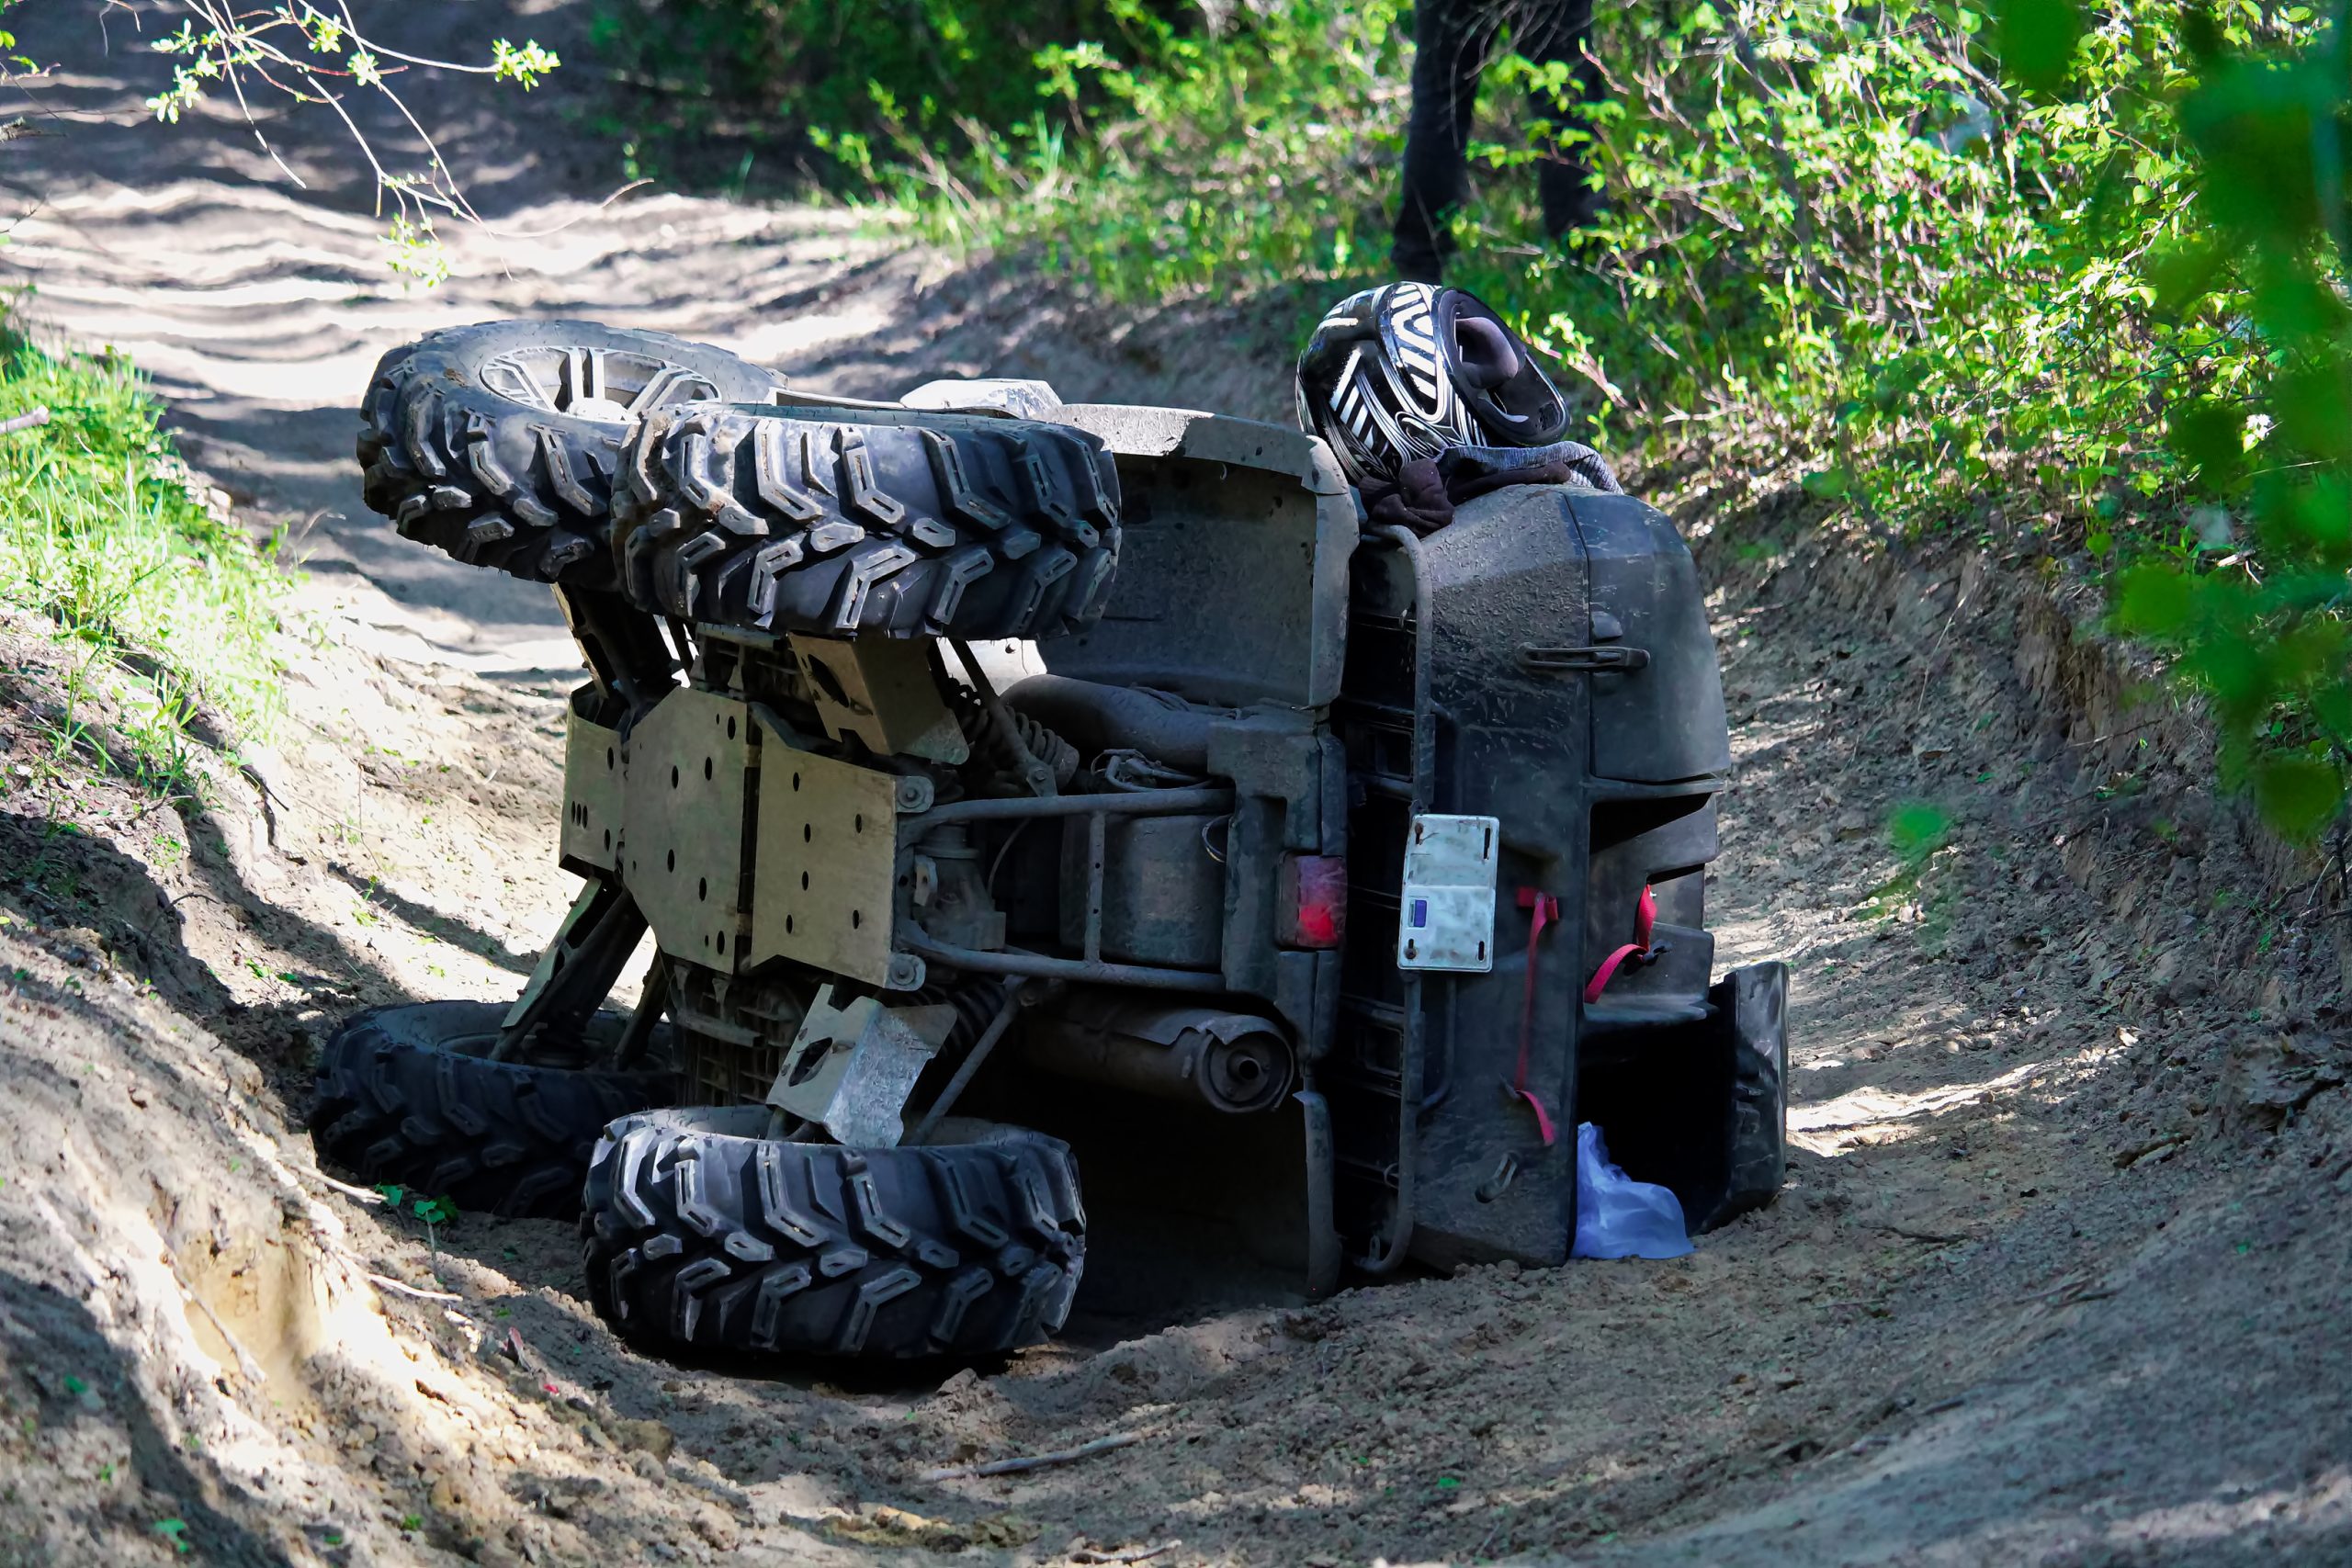 What to do after an ATV accident.